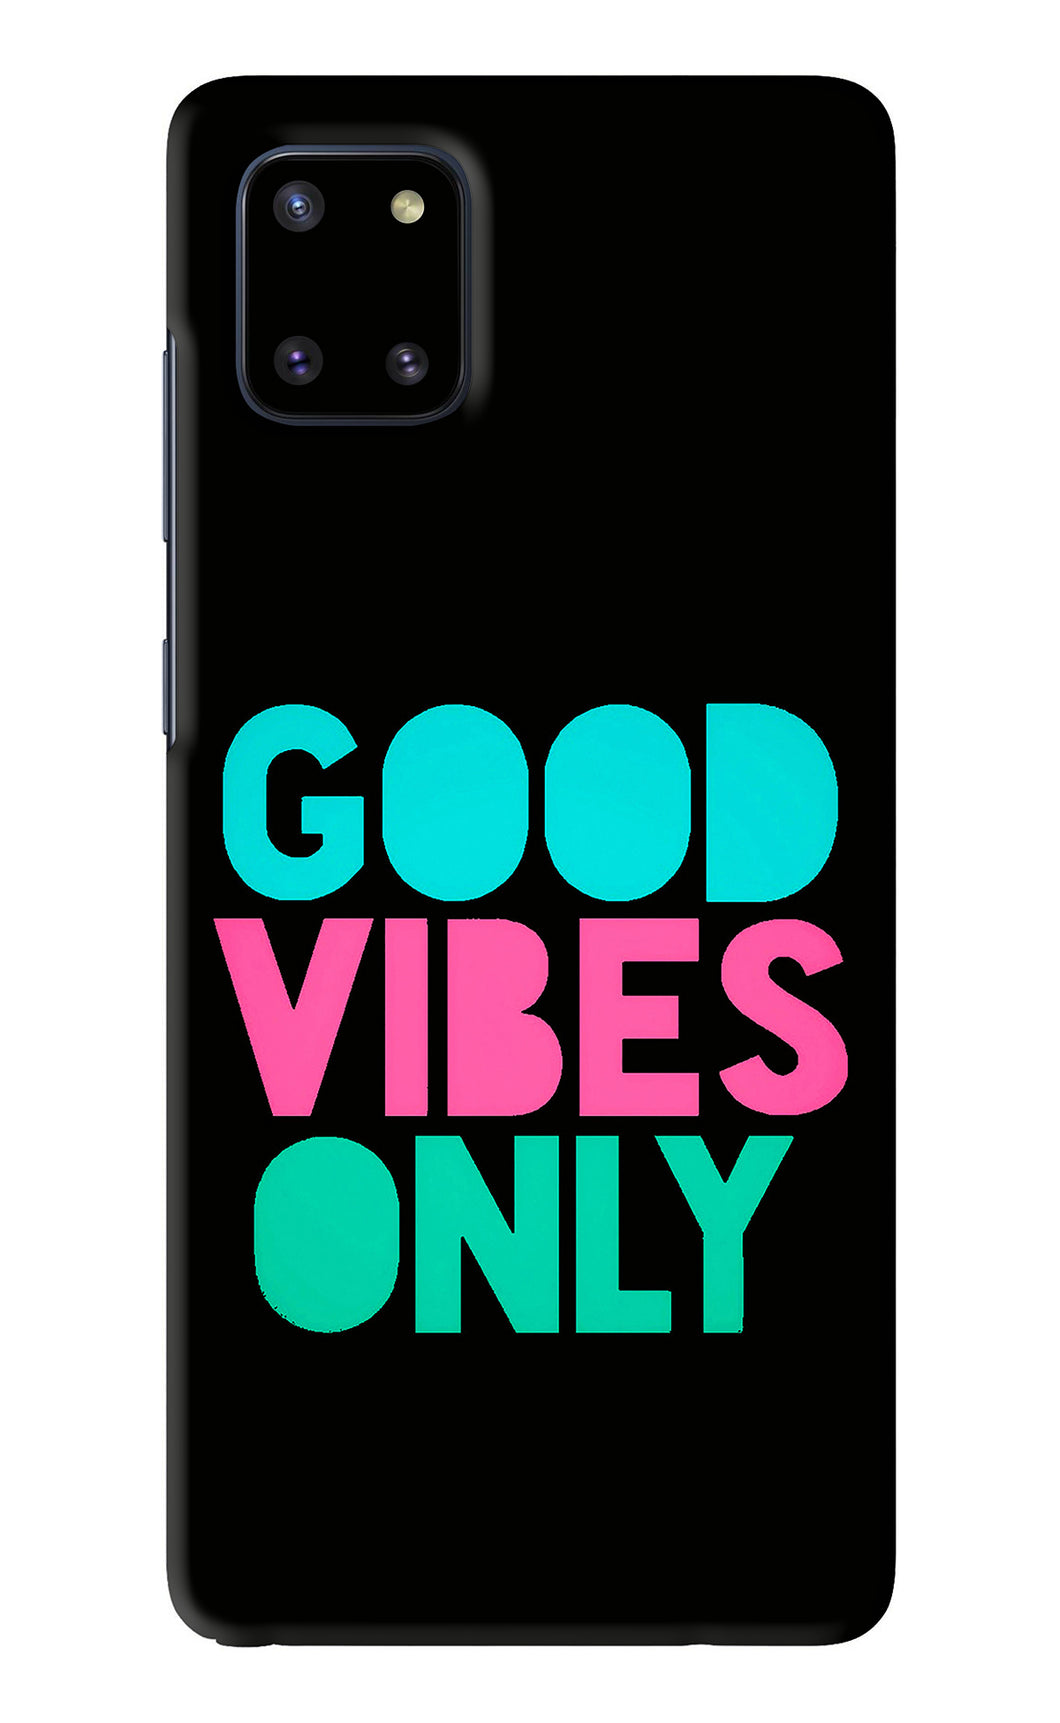 Quote Good Vibes Only Samsung Galaxy Note 10 Lite Back Skin Wrap